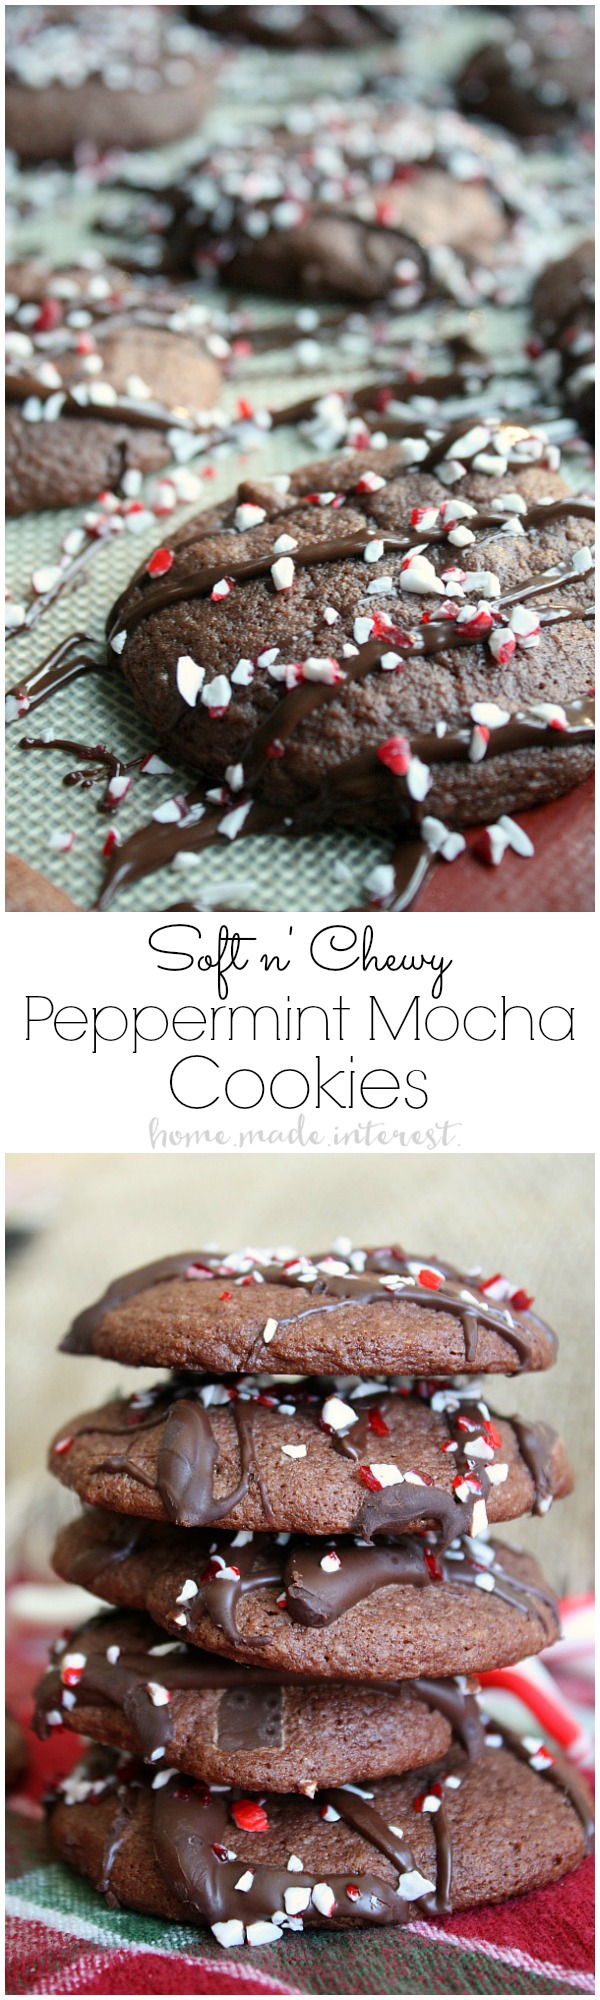 These peppermint mocha cookies are chocolate peppermint cookies with a hint of coffee flavor. This is my favorite Christmas cookie recipe!